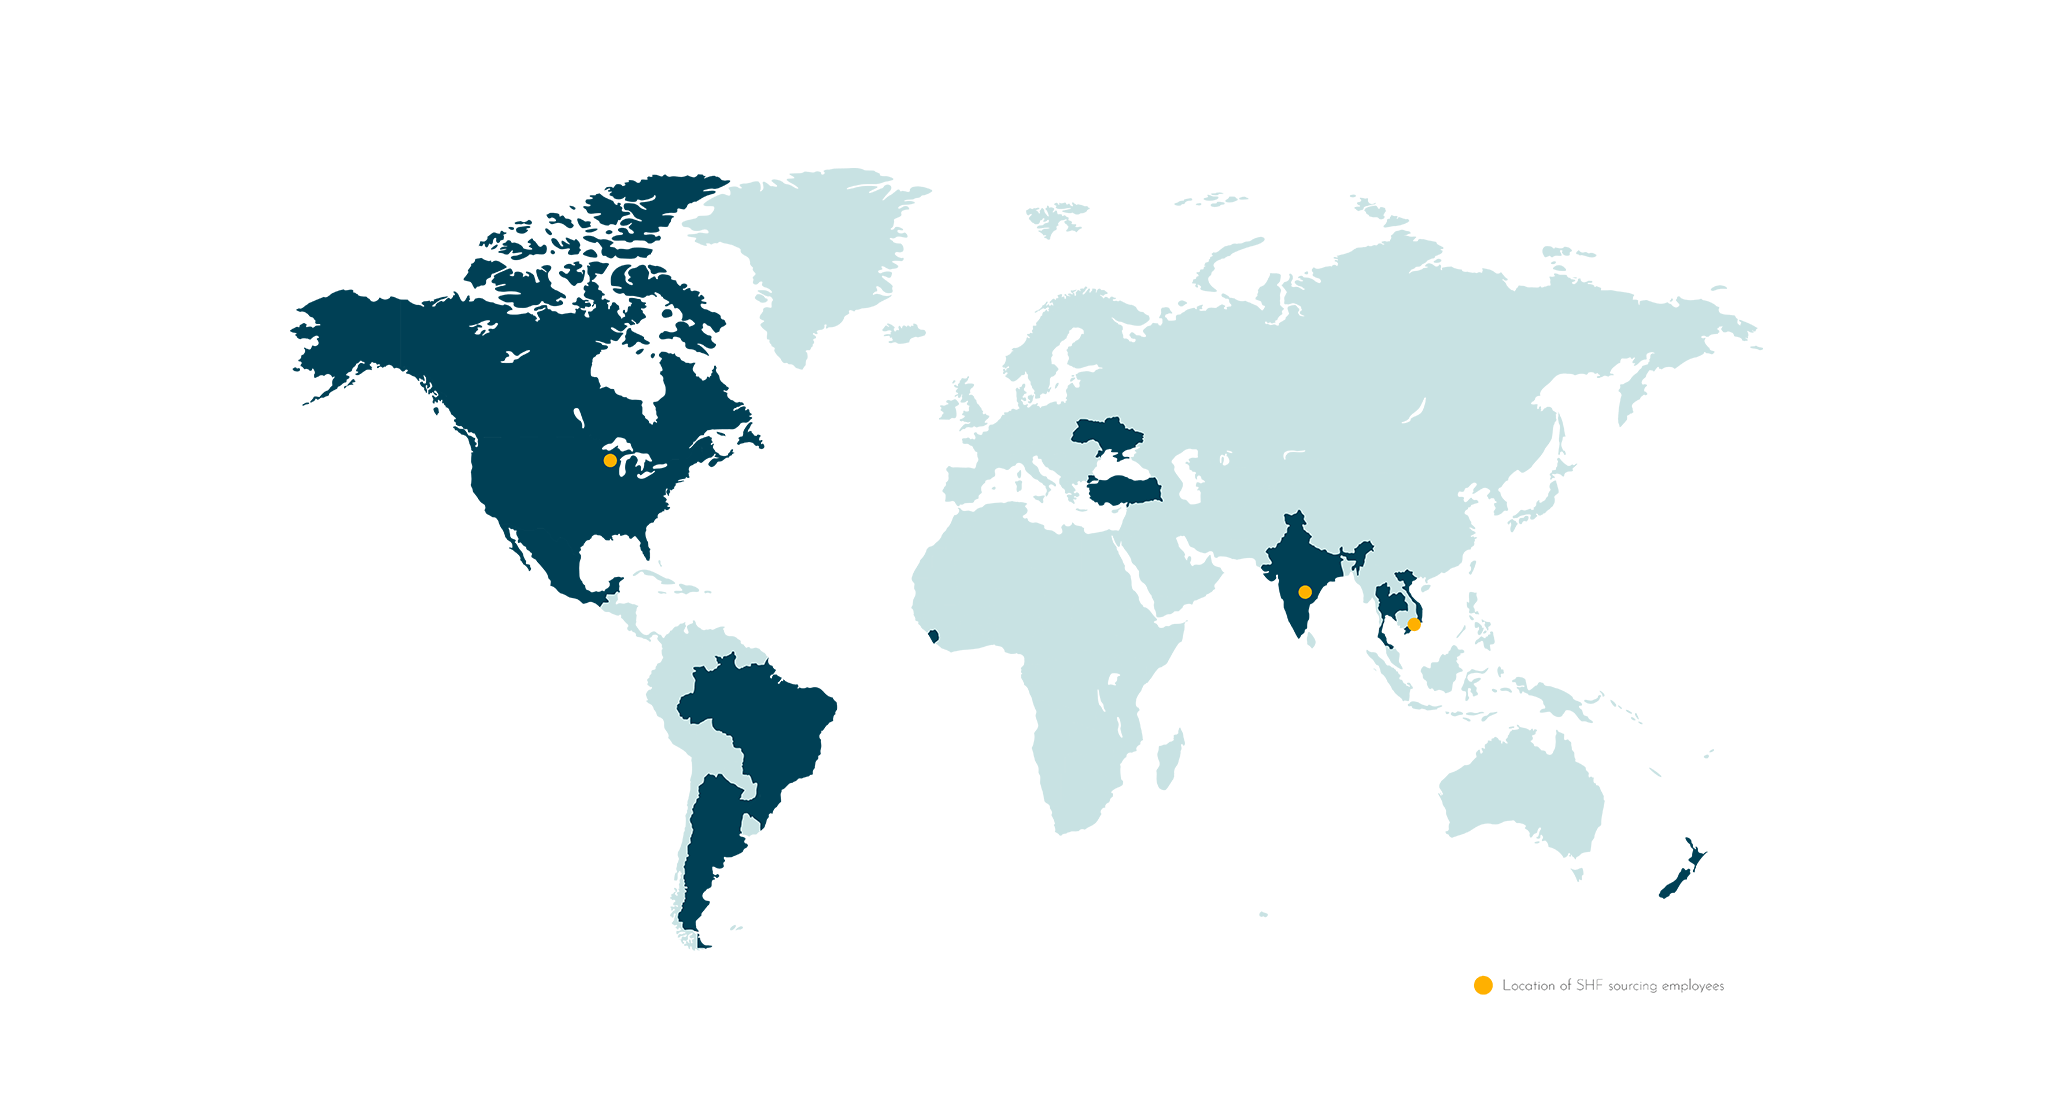 World map in shades of blue with highlighted points in yellow.